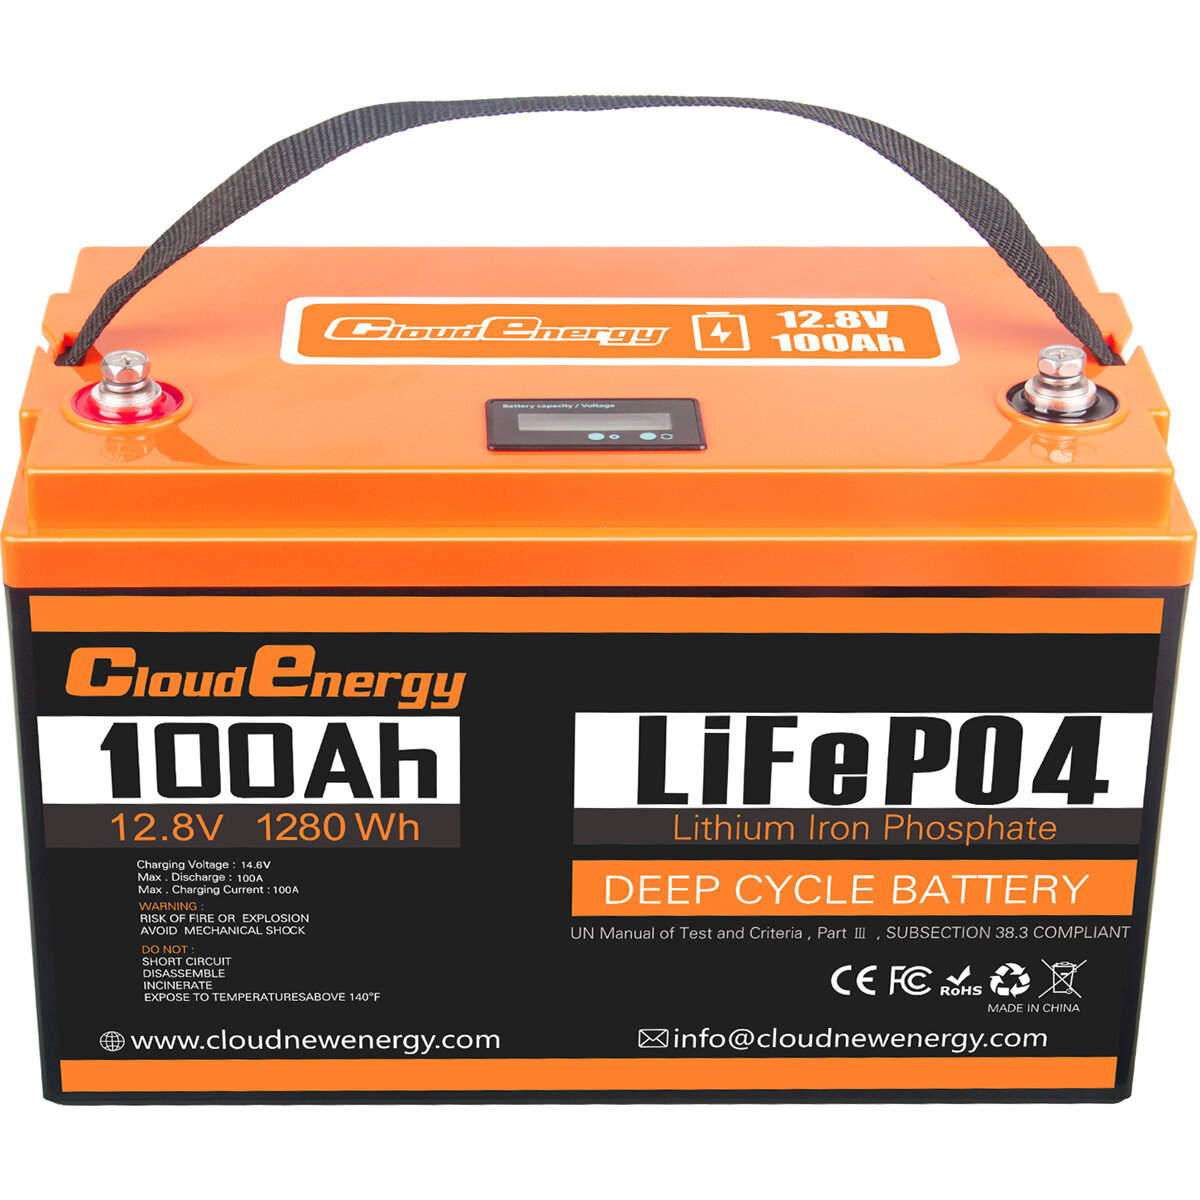 

[EU Direct] Cloudenergy 12V 100Ah LiFePO4 Lithium Battery Pack Backup Power 1280Wh Energy 6000+ Deep Cycles Built-in 100